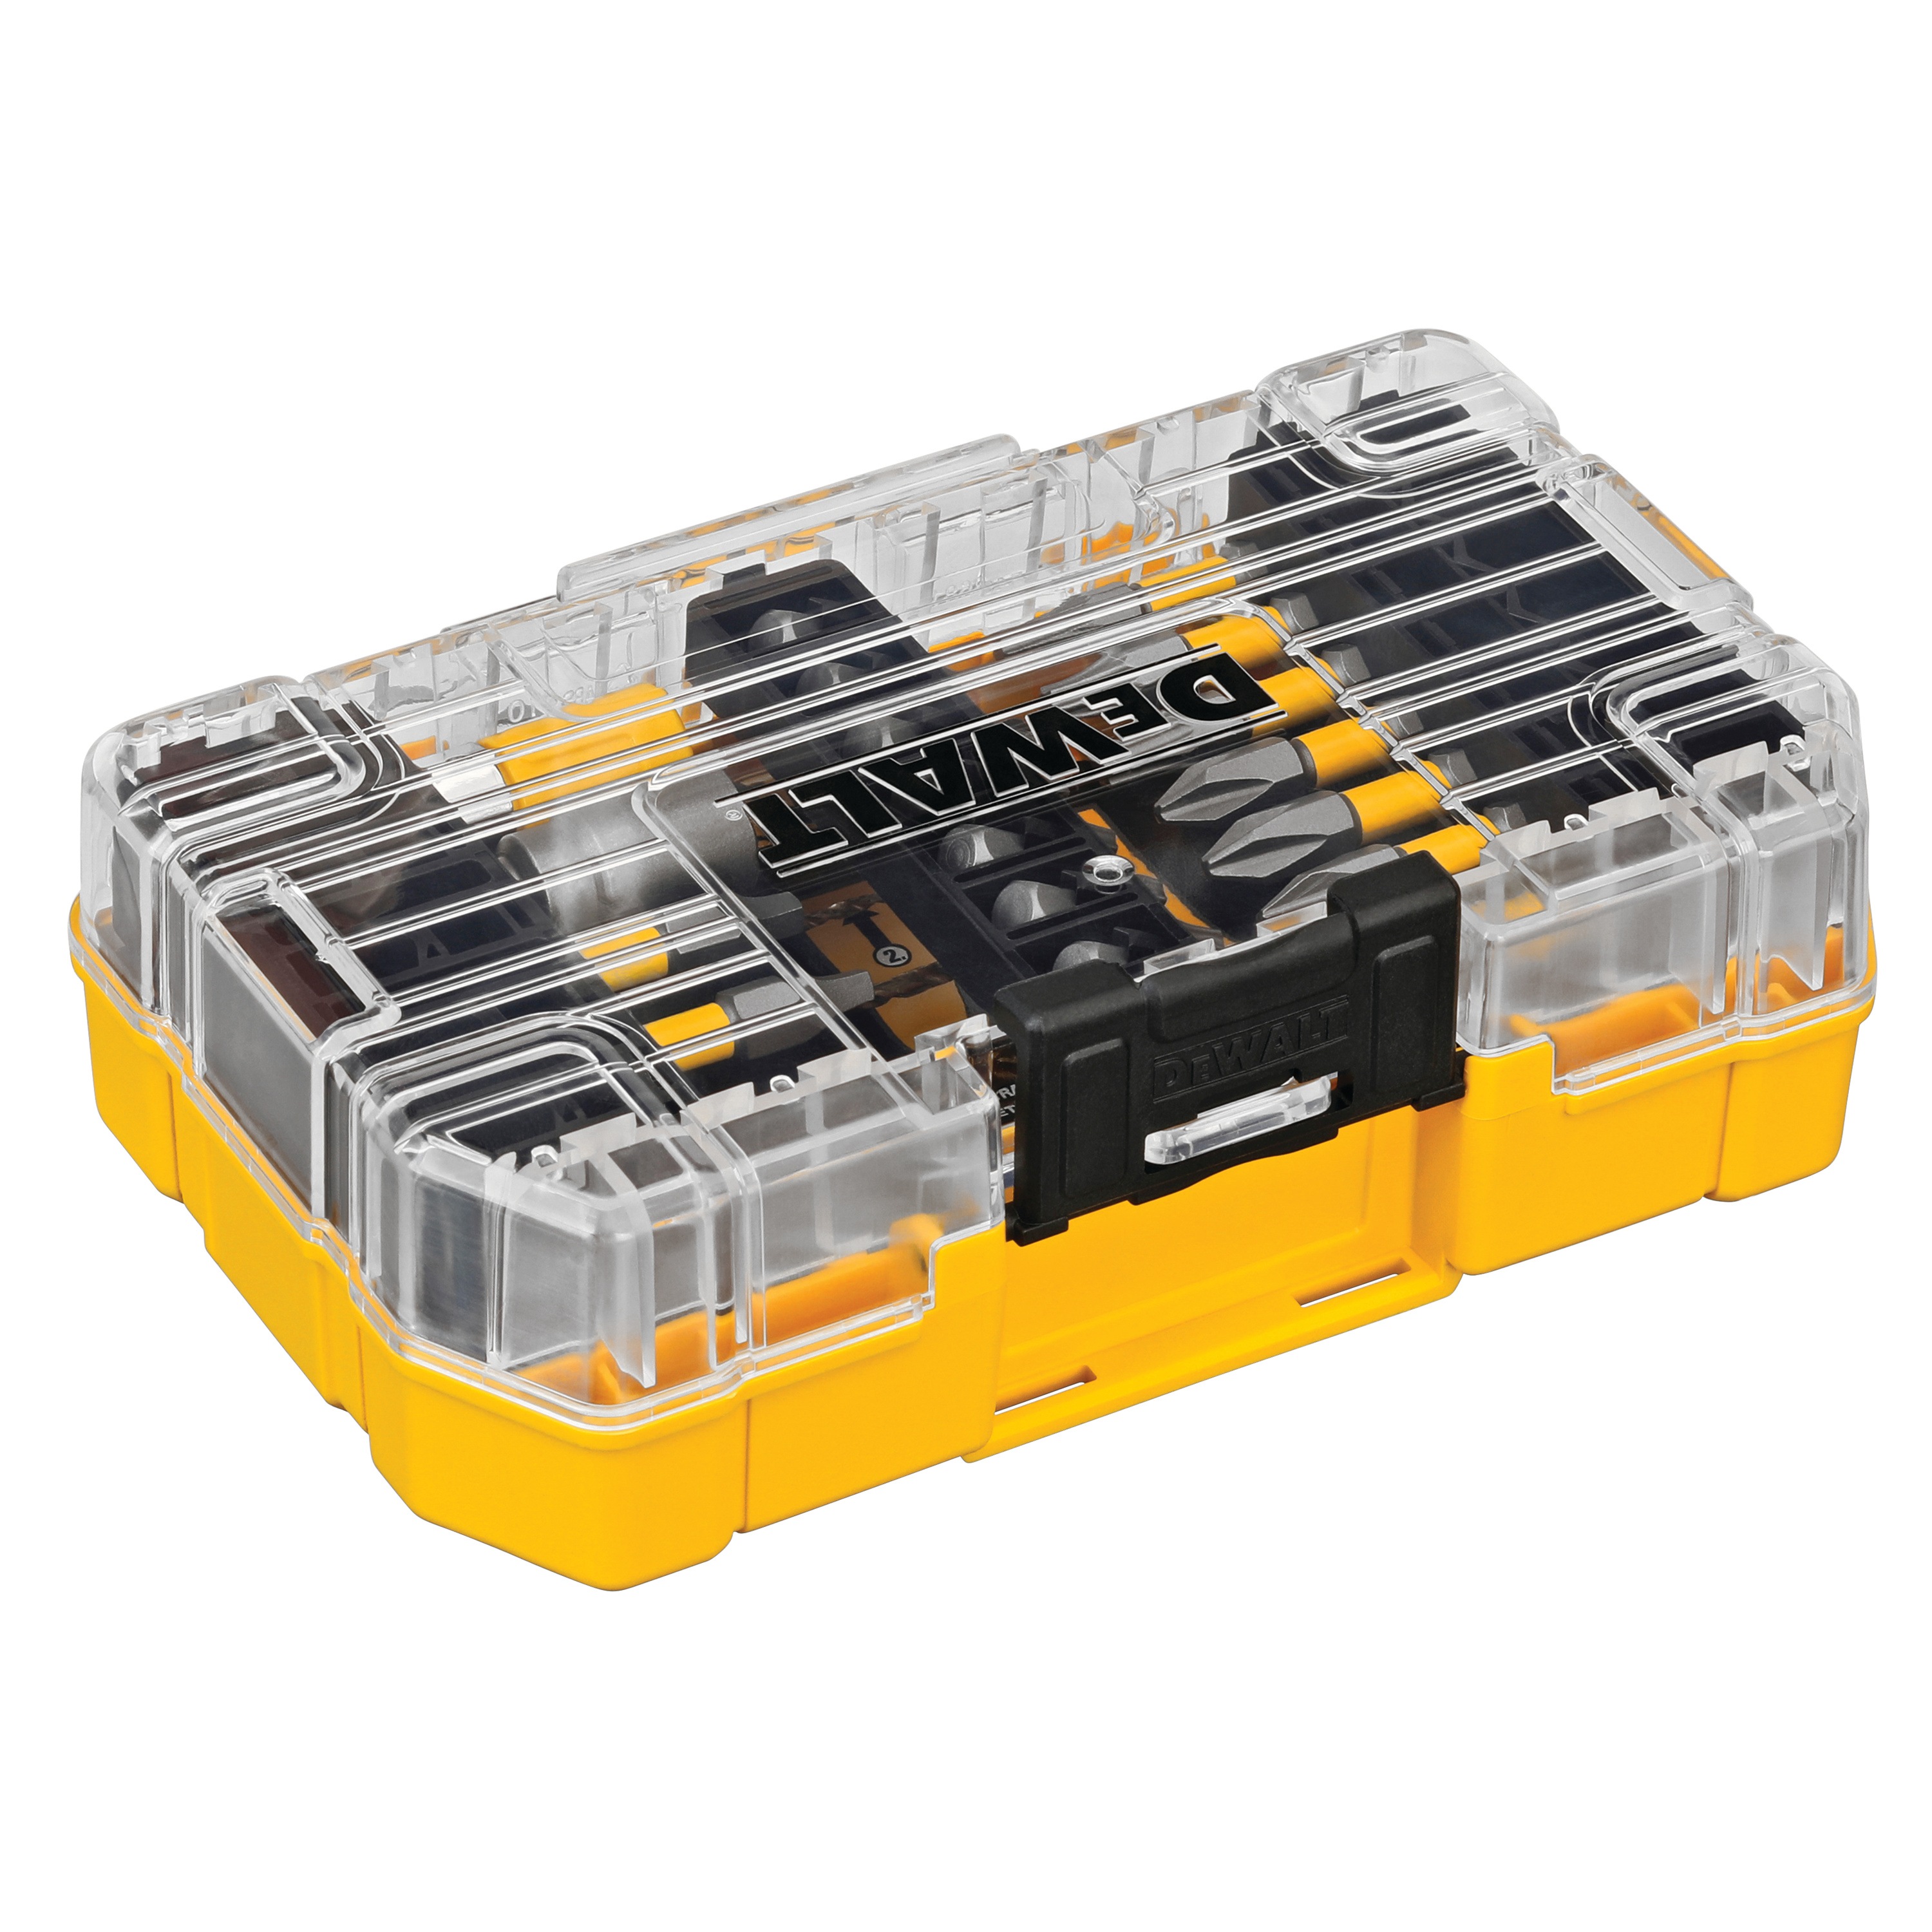 profile of 32 piece Screw Lock Set with sleeve in a closed case.